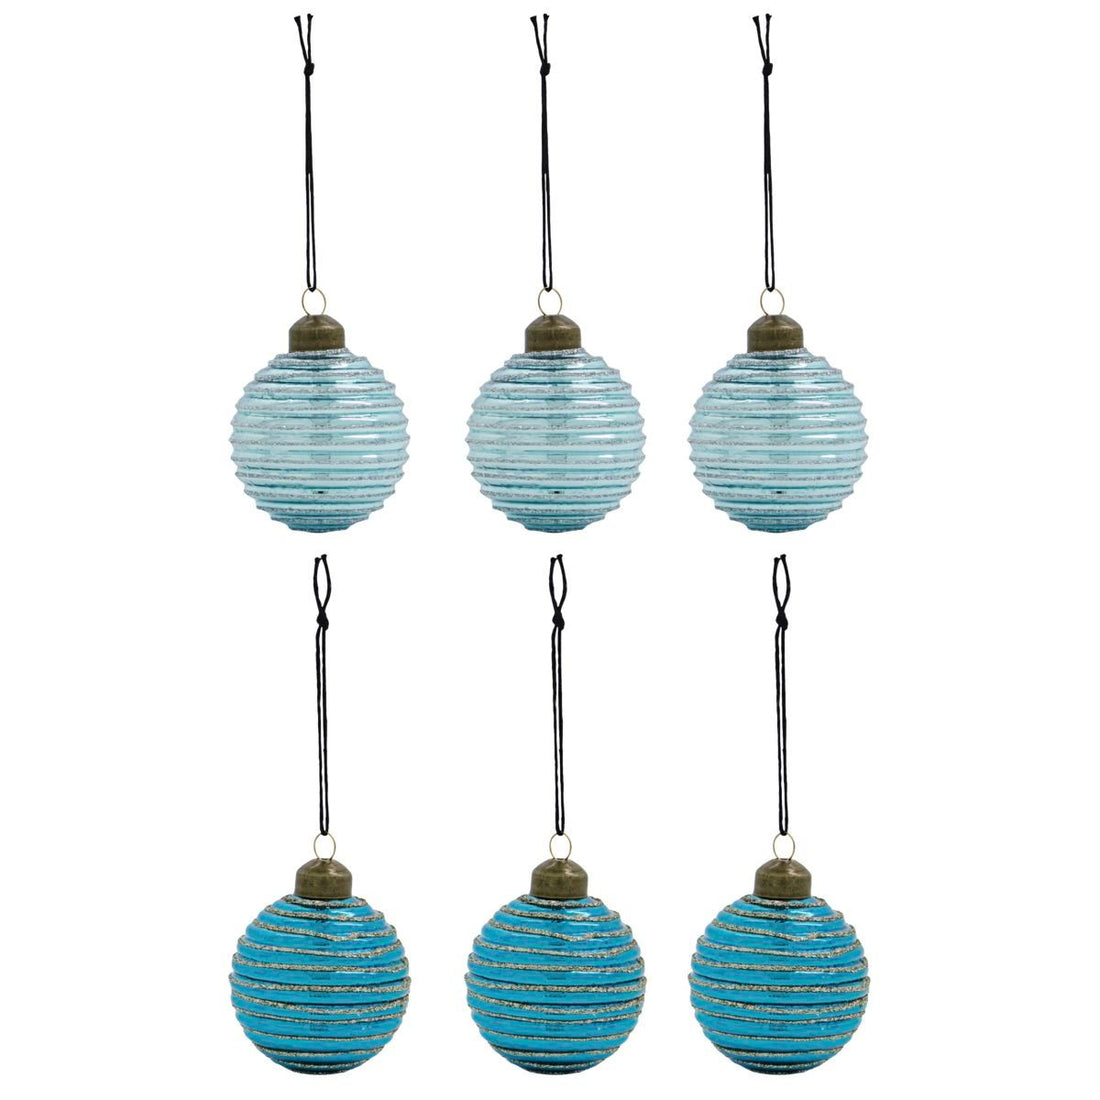 House Doctor Christmas decorations, lolli, blue